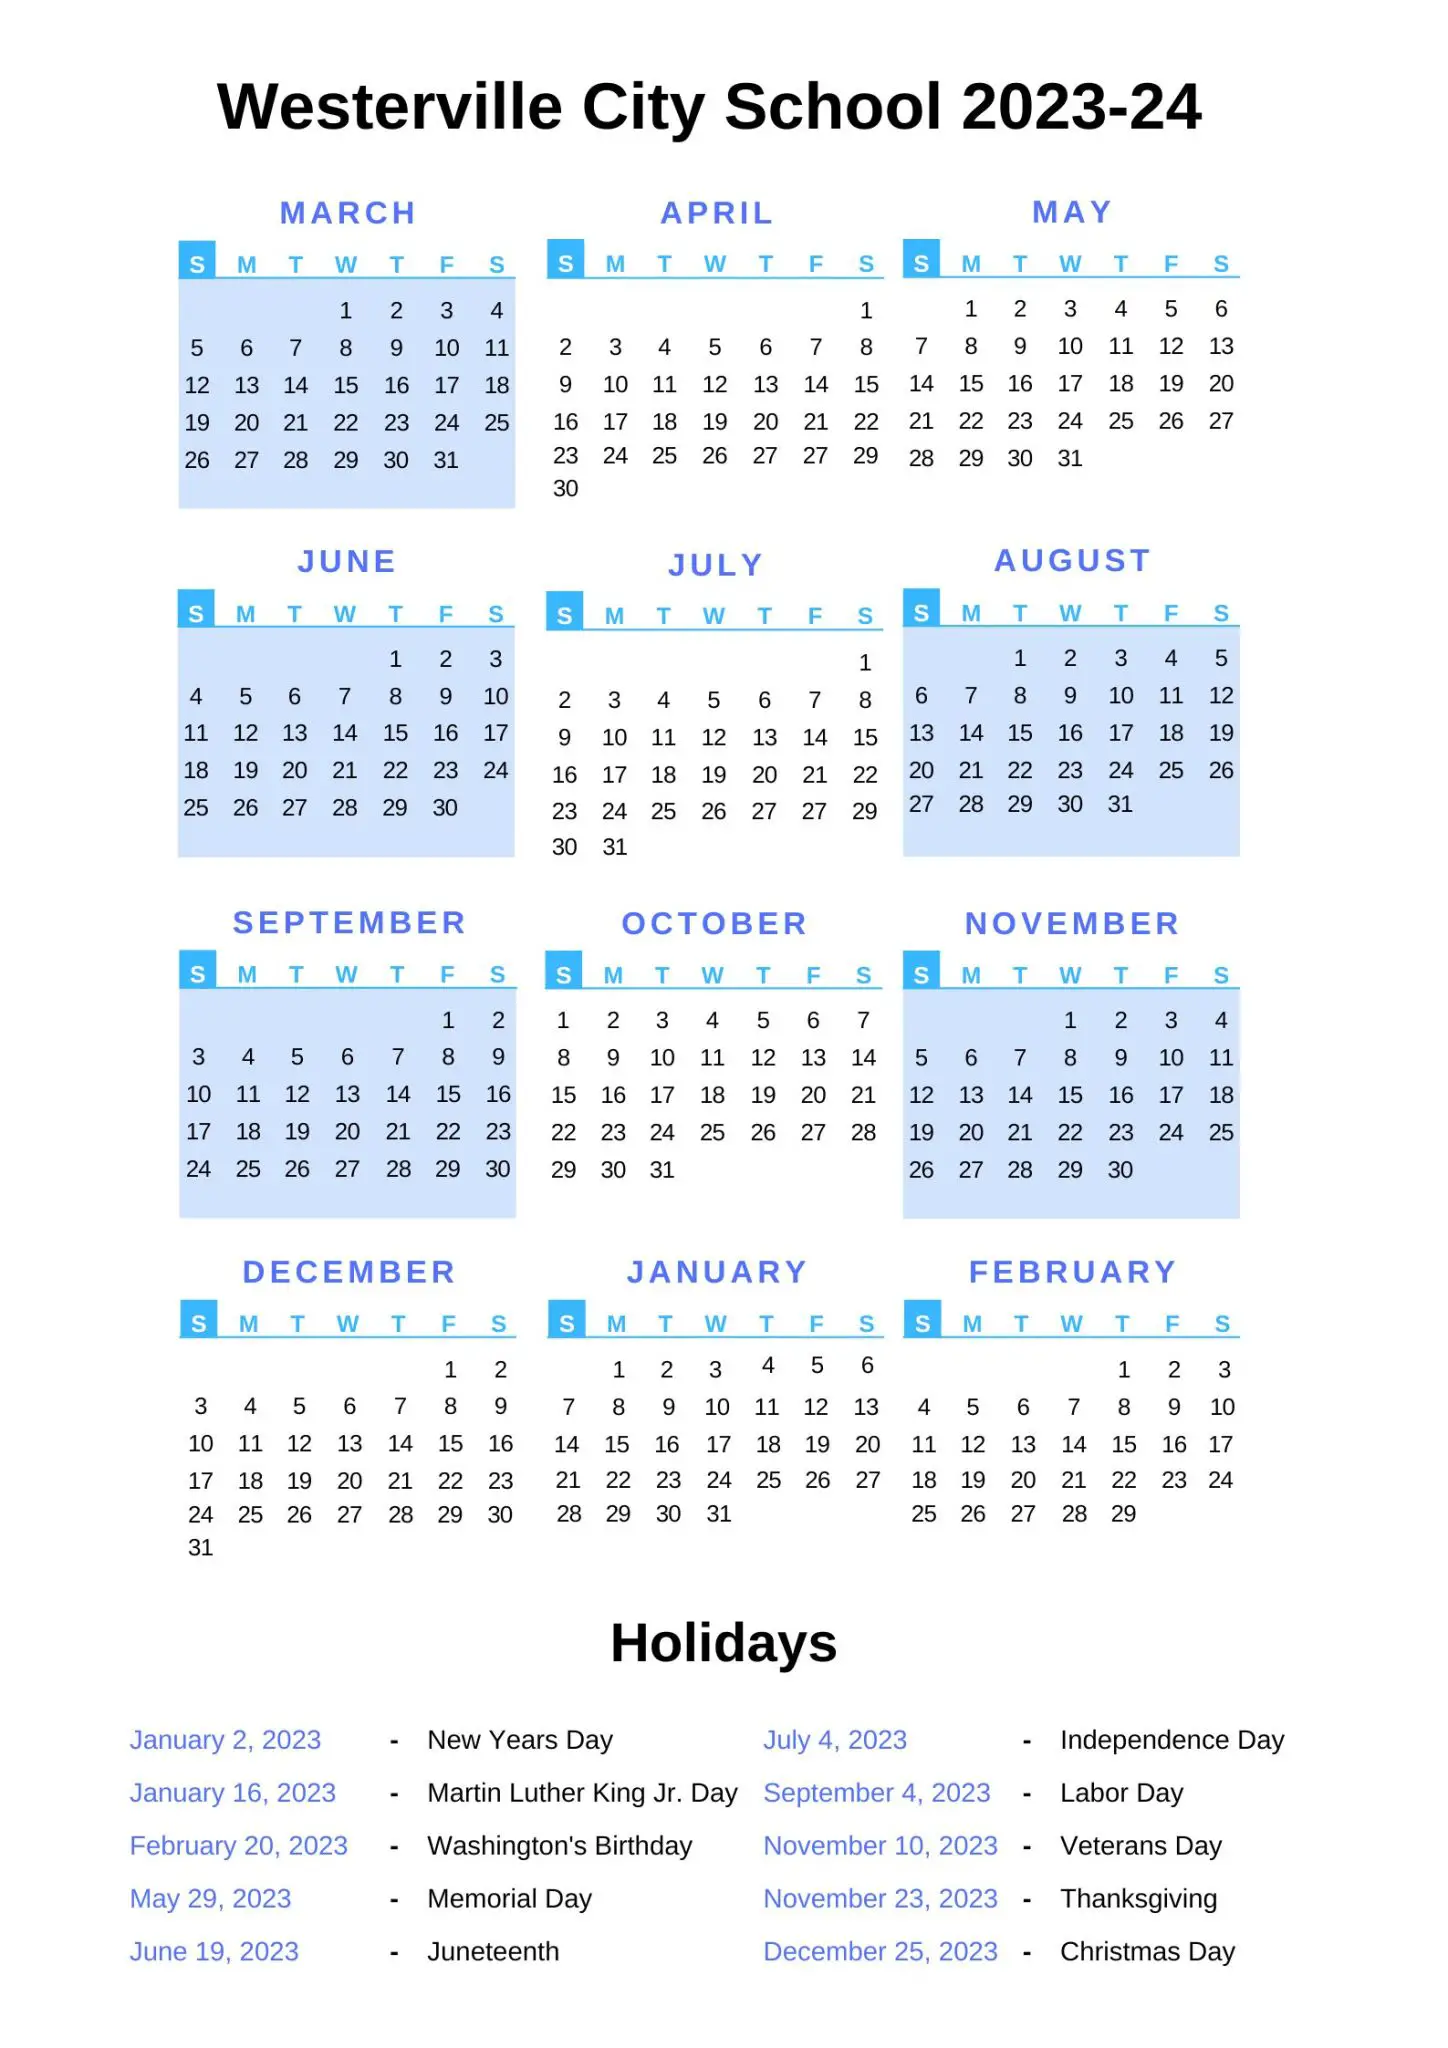 Westerville City Schools Calendar 2023-24 With Holidays